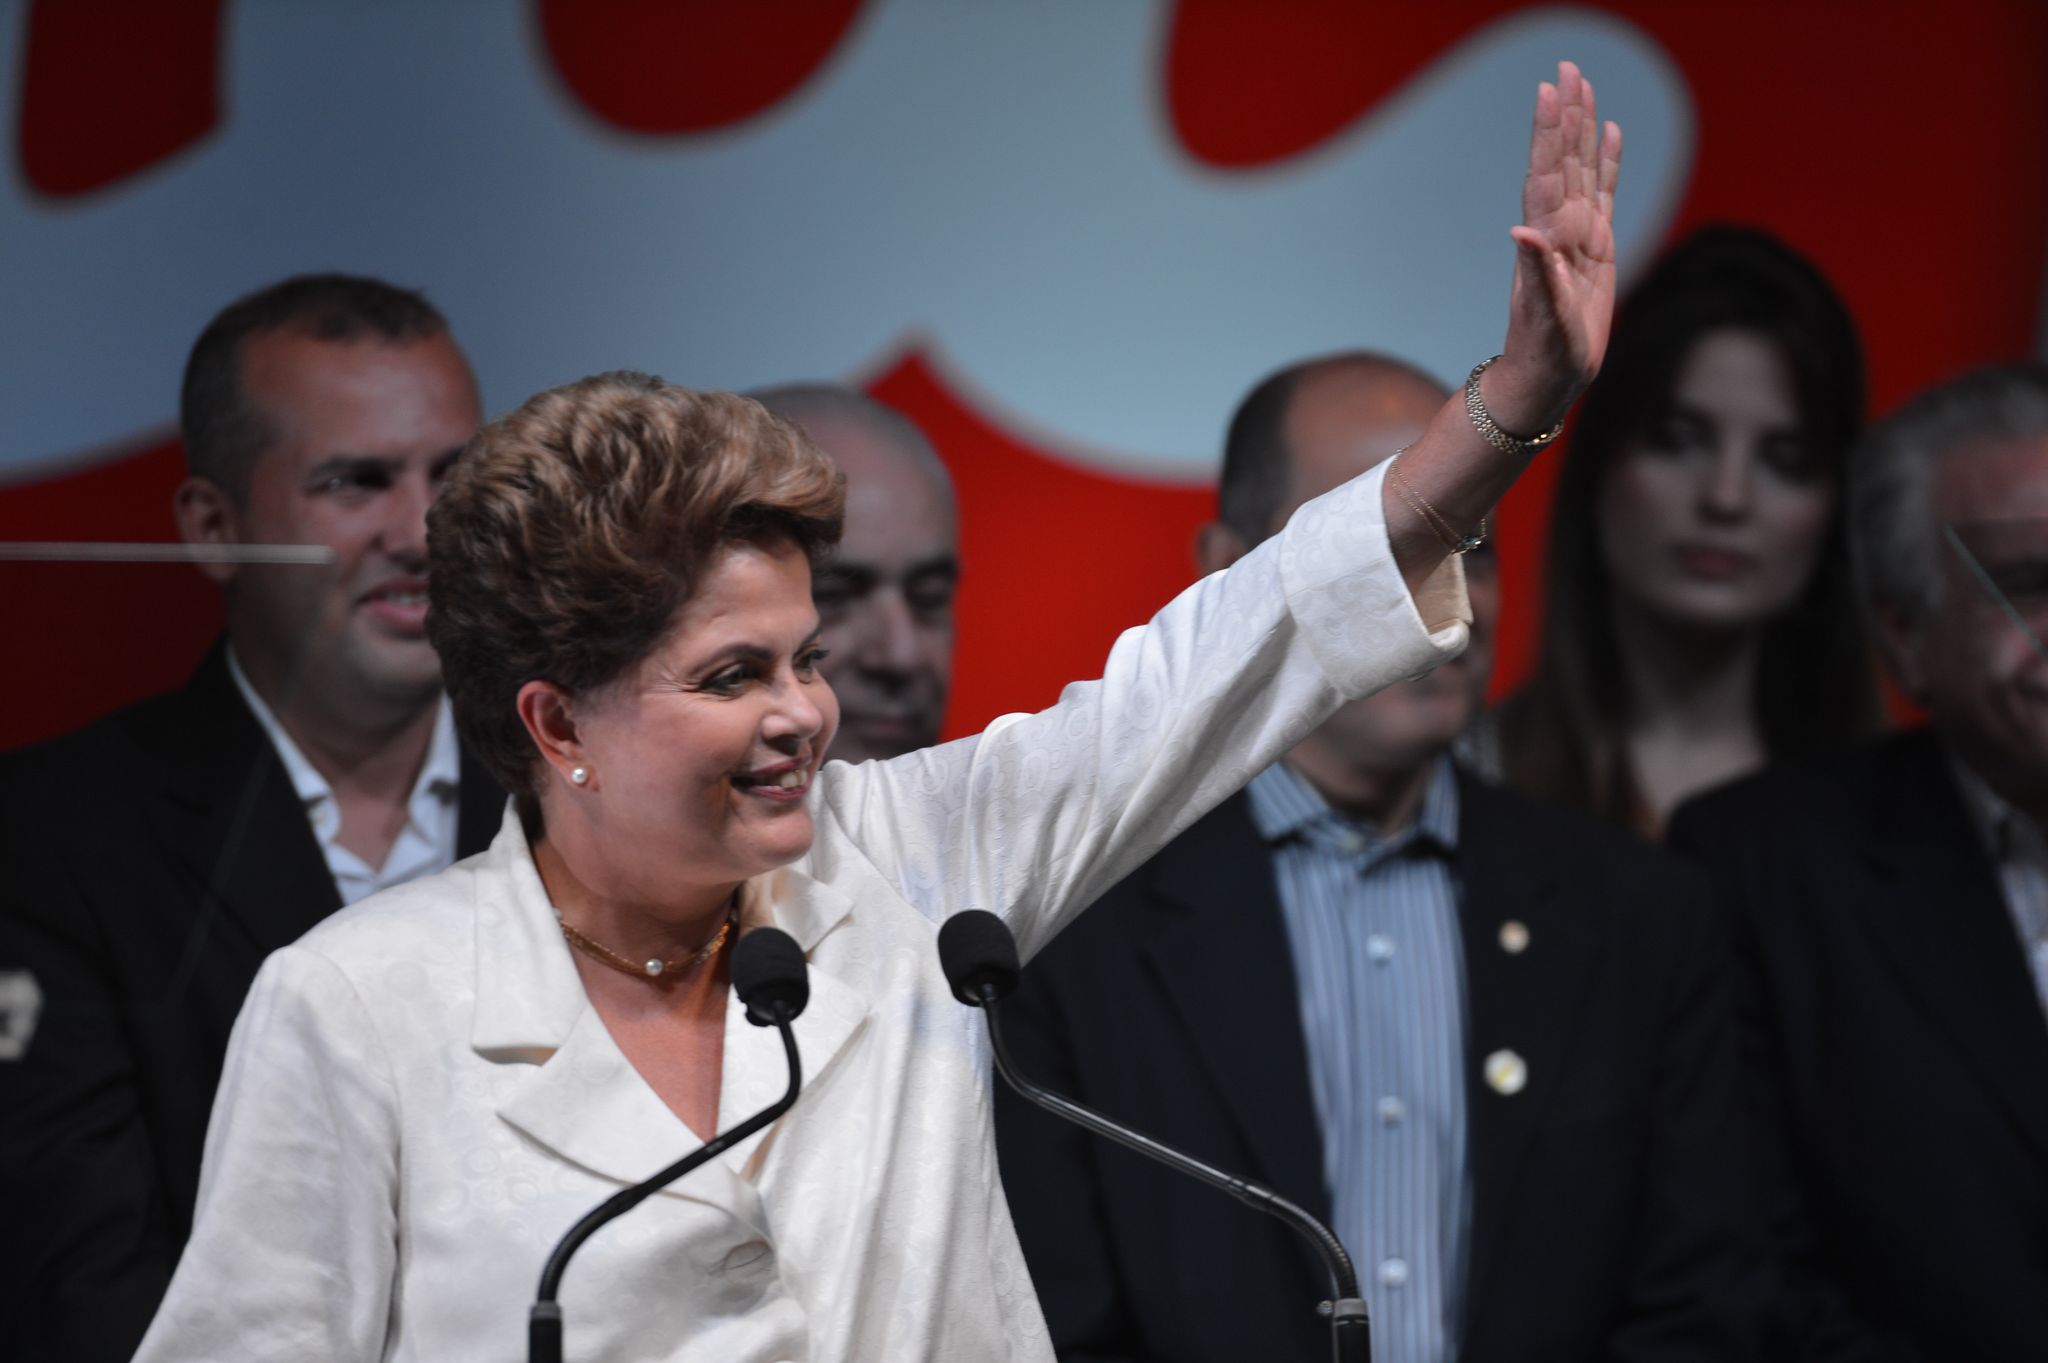 Brazil’s Rousseff Calls for Unity During PT Conference